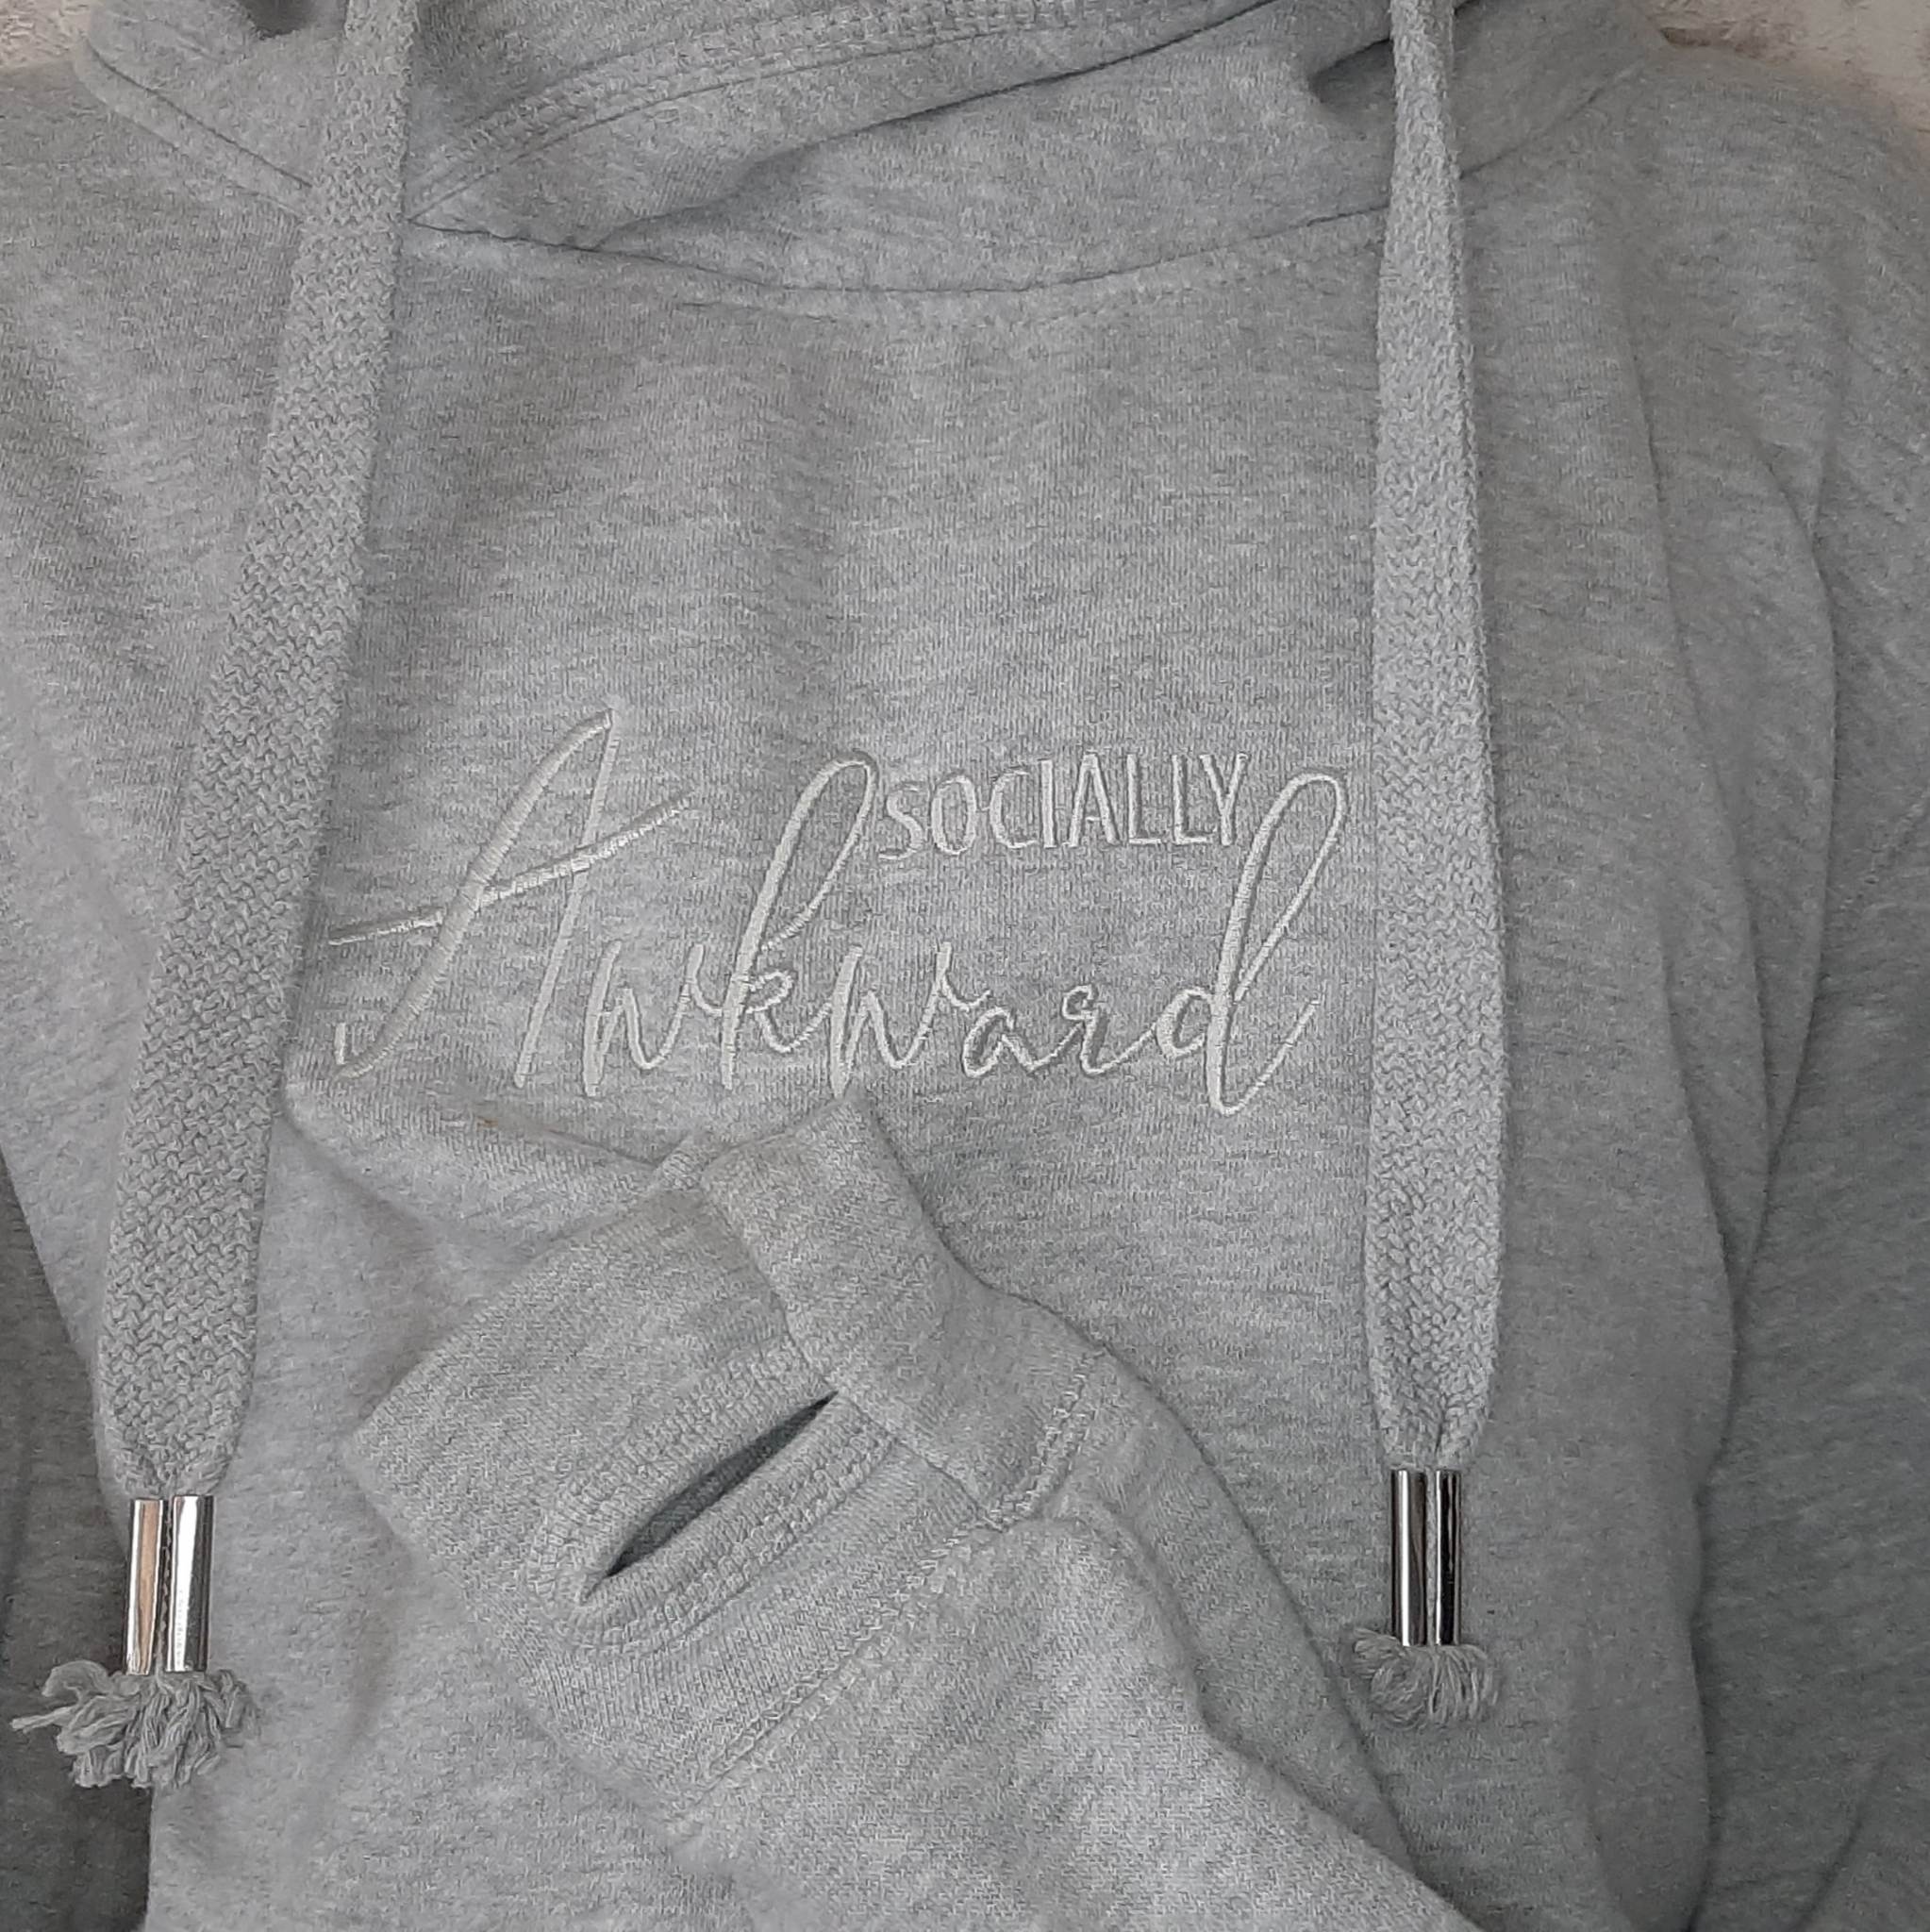 Crossover Neck Hoodie with Socially Awkward Slogan